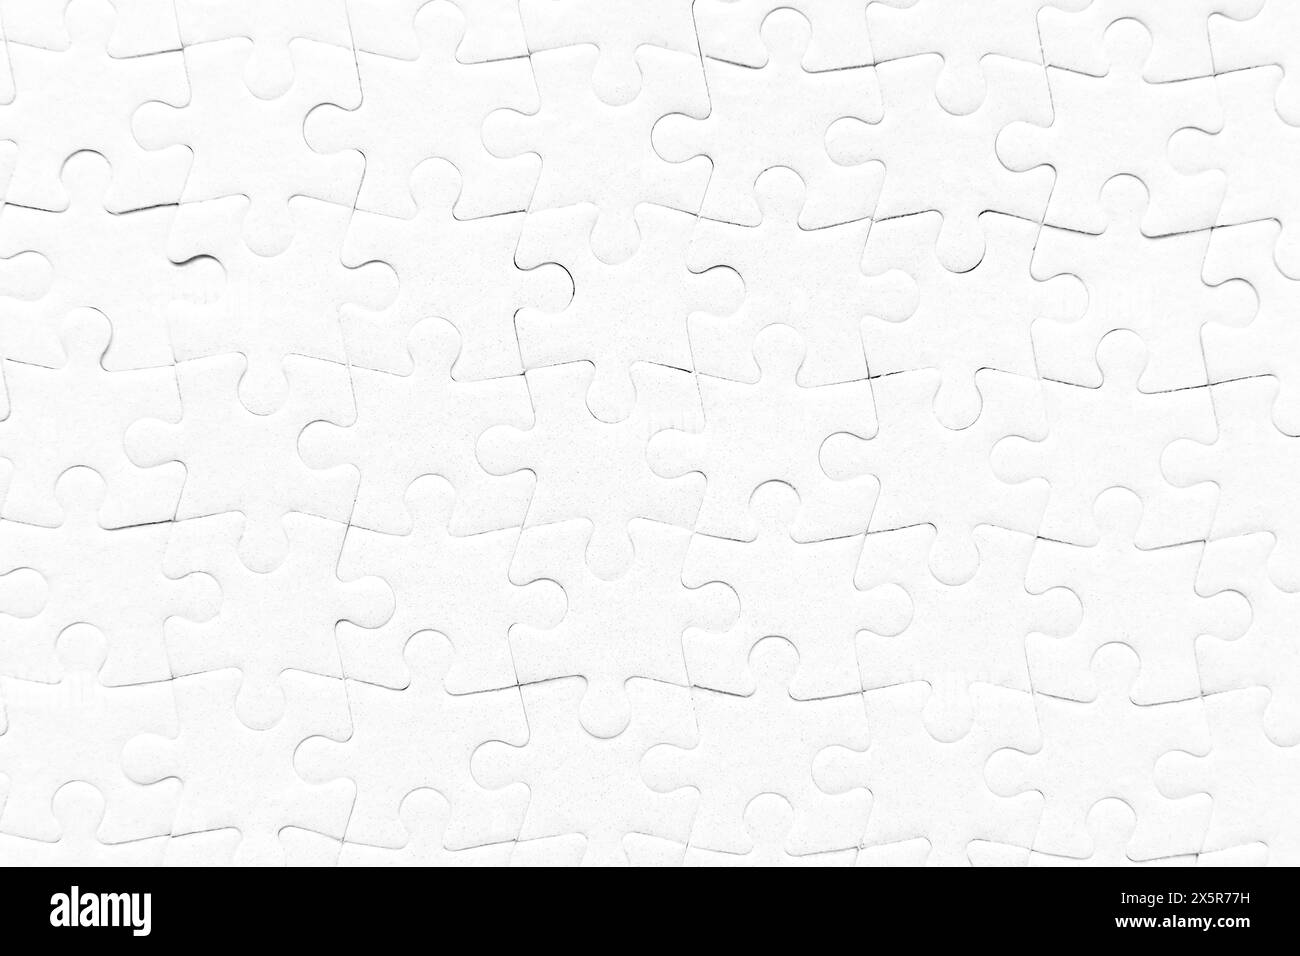 Blank white jigsaw puzzle pieces arranged into an abstract background. Unity and interconnectedness concept. Stock Photo